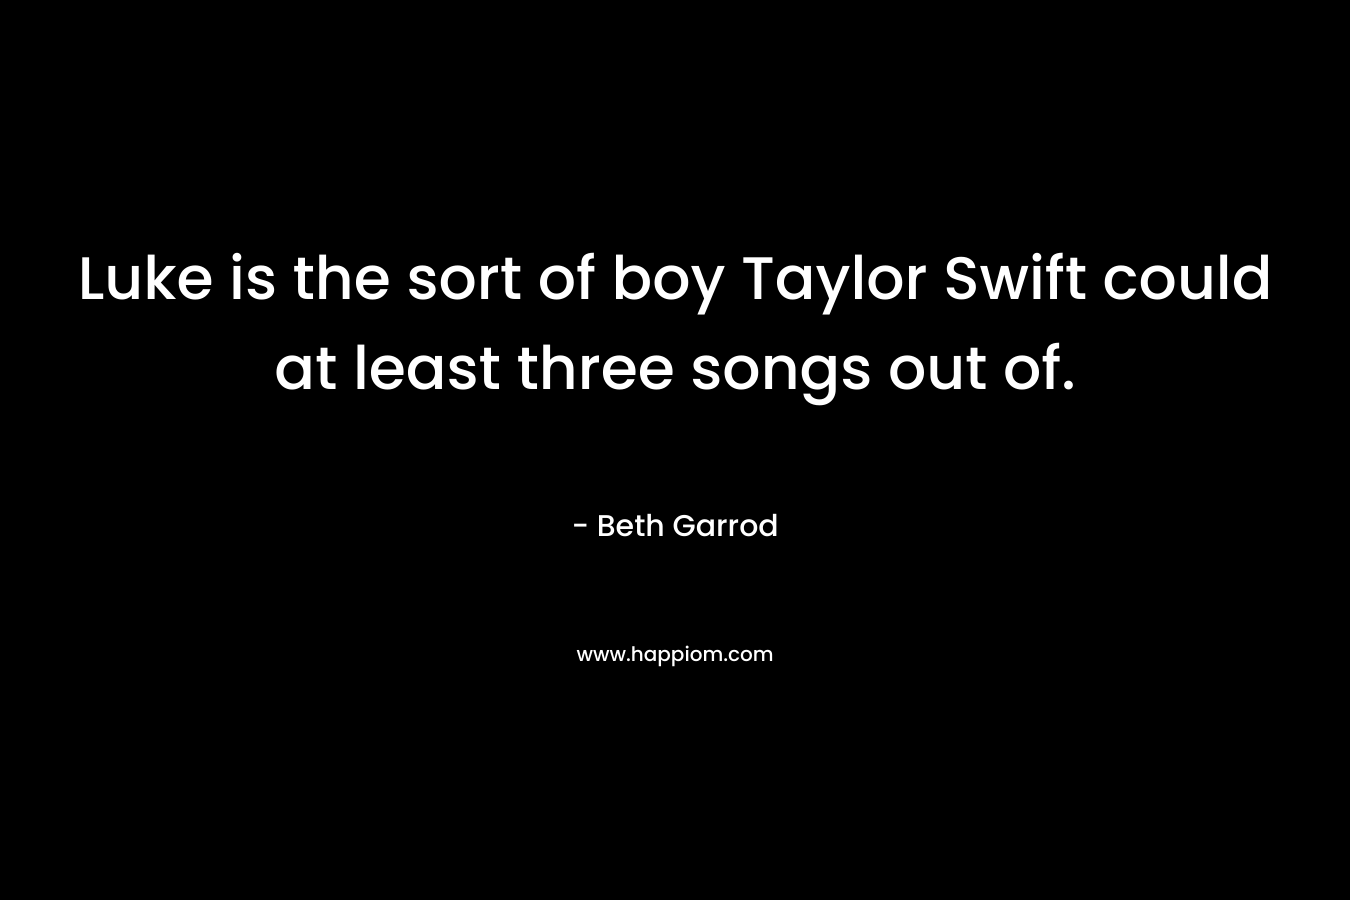 Luke is the sort of boy Taylor Swift could at least three songs out of. – Beth Garrod